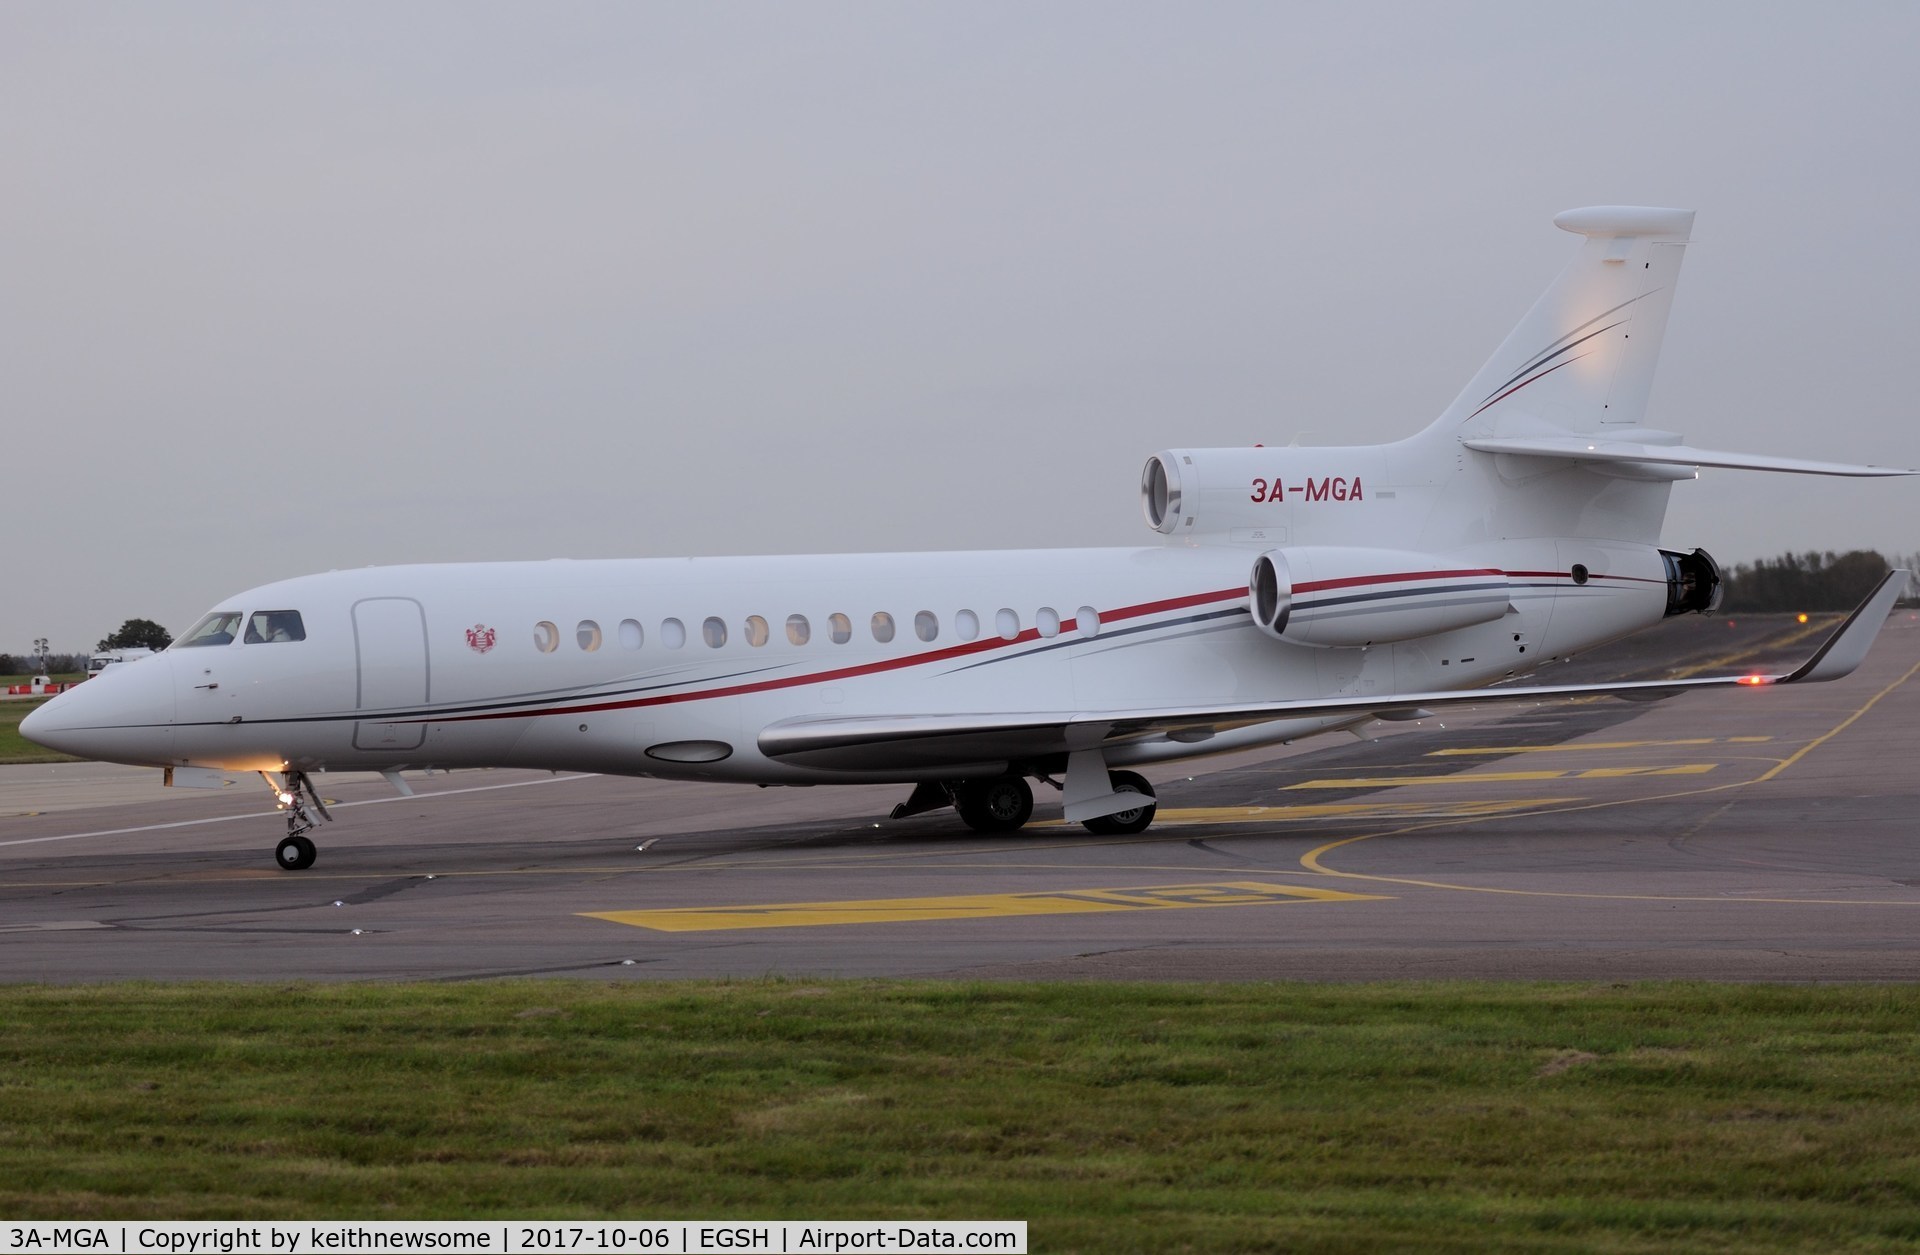 3A-MGA, 2013 Dassault Falcon 900EX C/N 195, Nice Late Visitor.